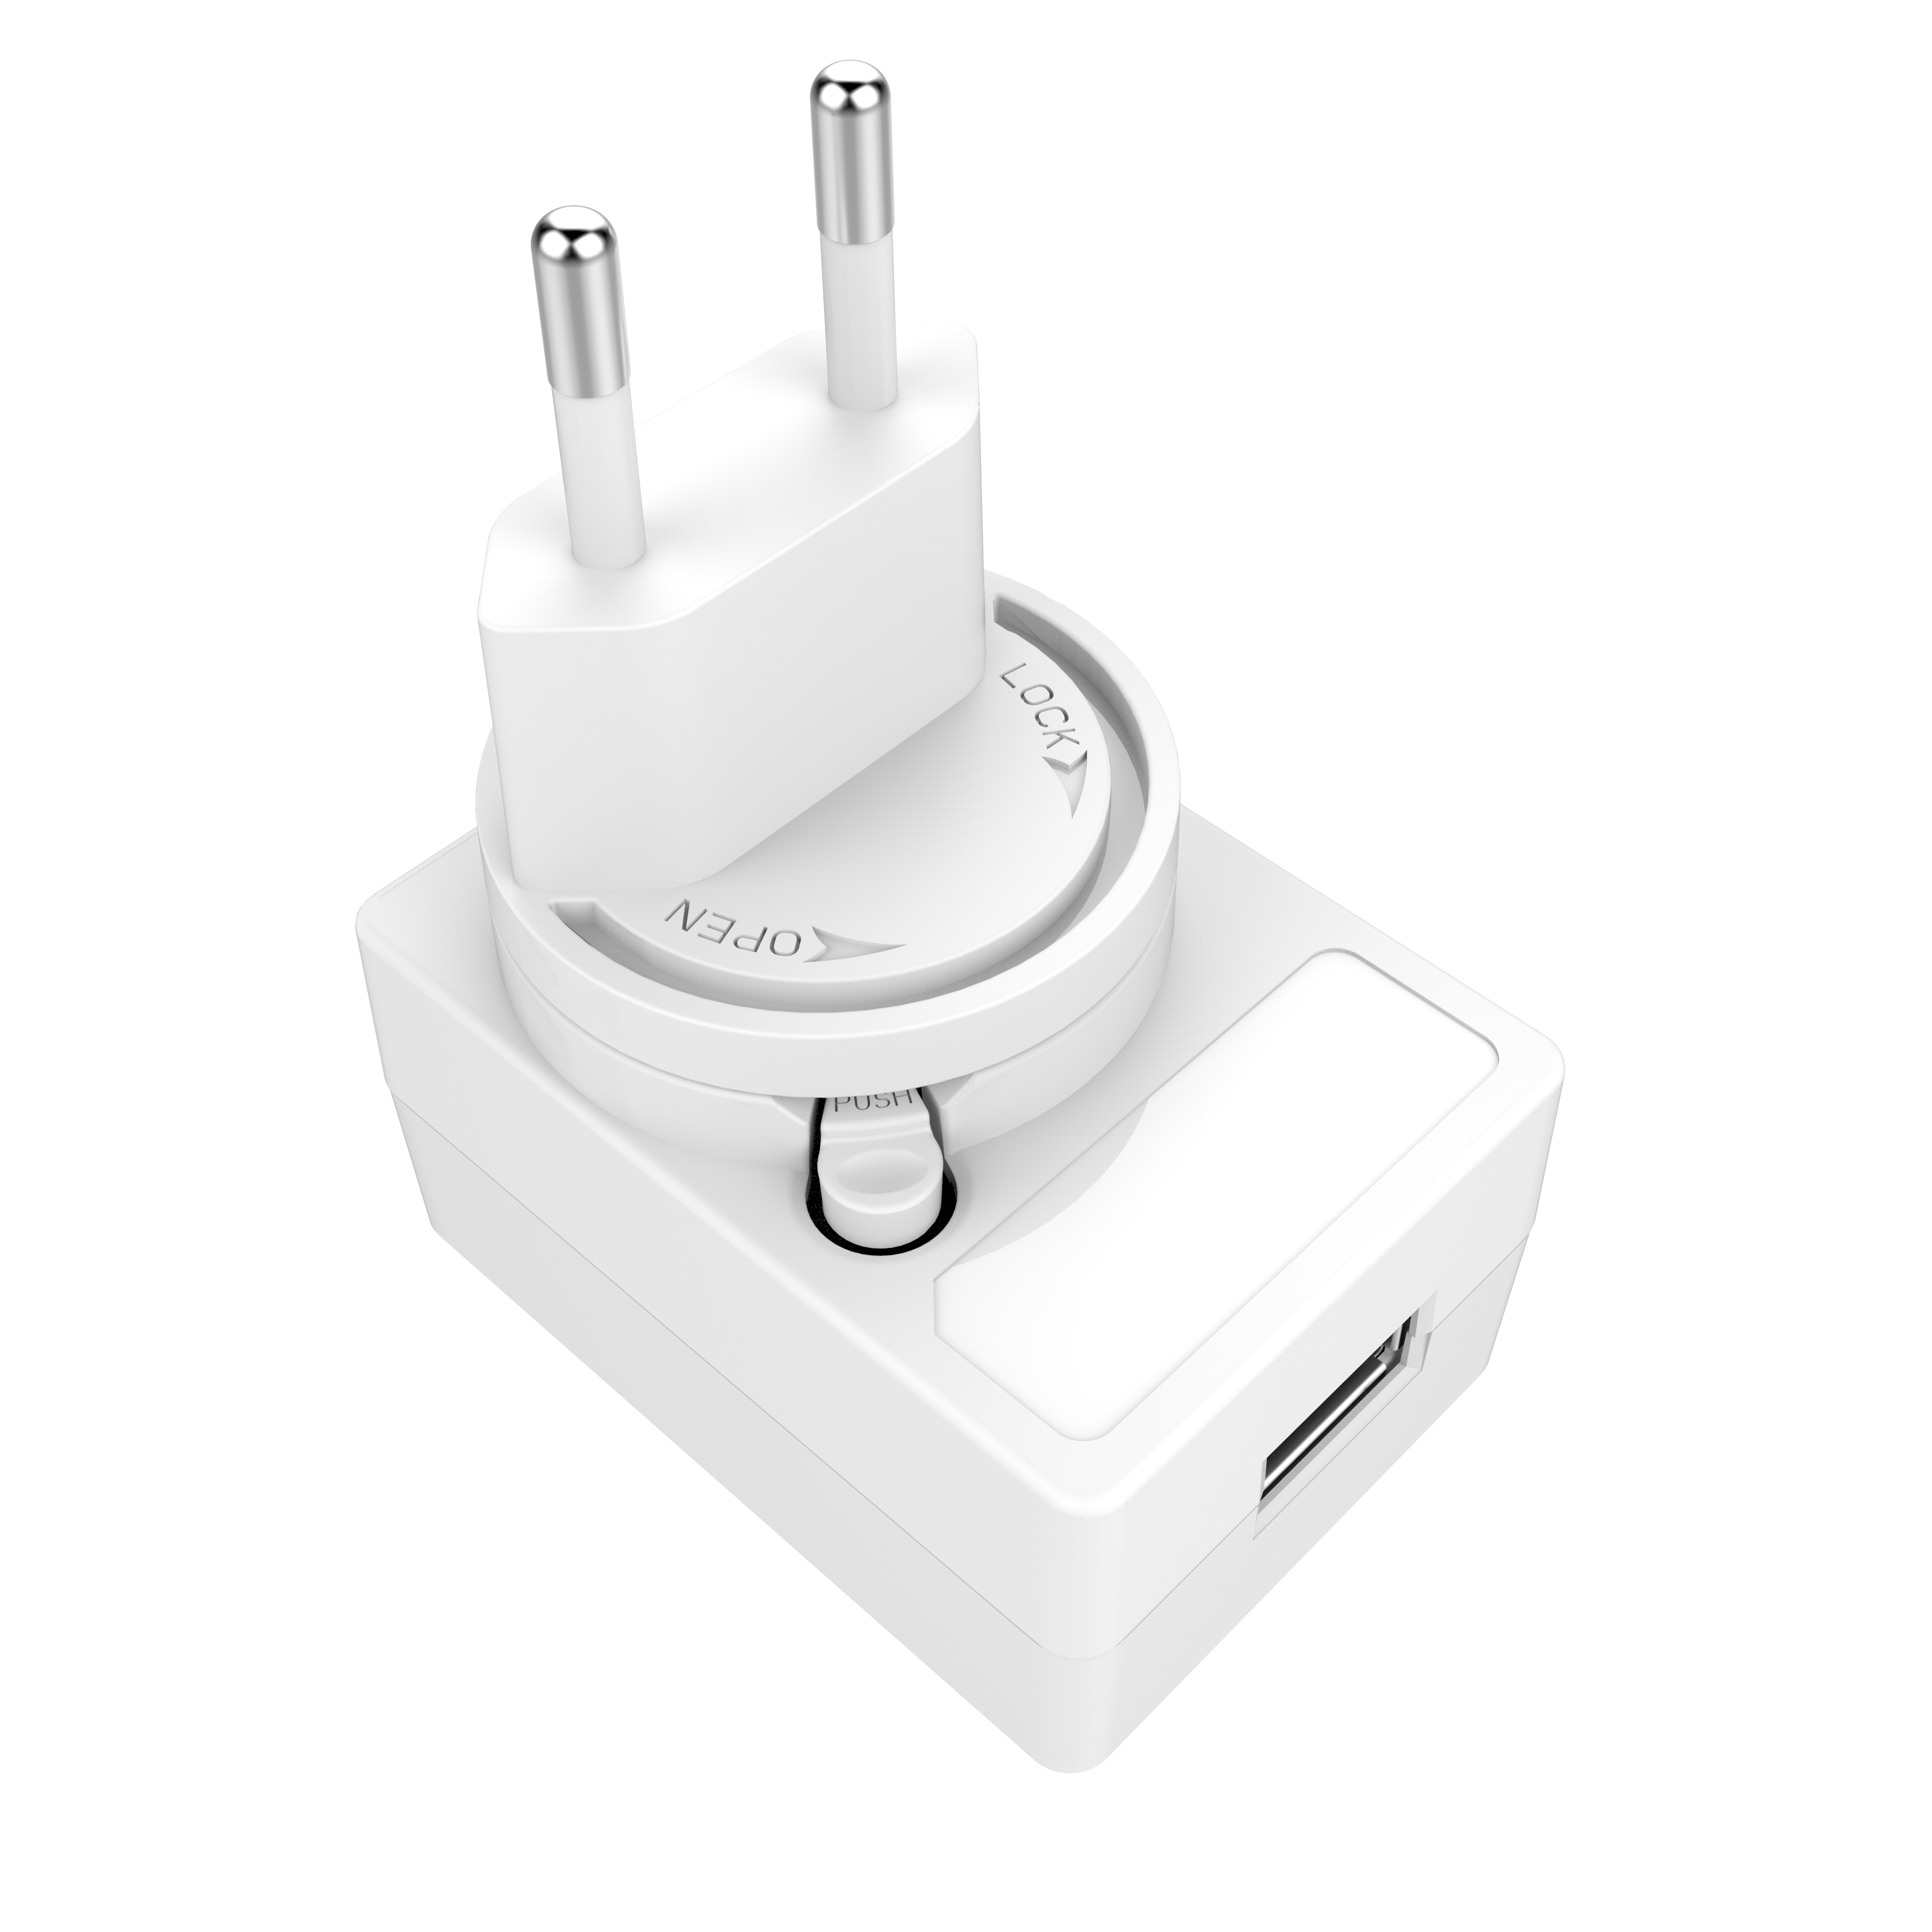 5V 2A 2.5A 3A BIS US EU UK AU PSE Plug Adapter SMPS Indian Switching Power Supply USB Adaptor ACDC Charger ECAS UL BIS PSE SAA